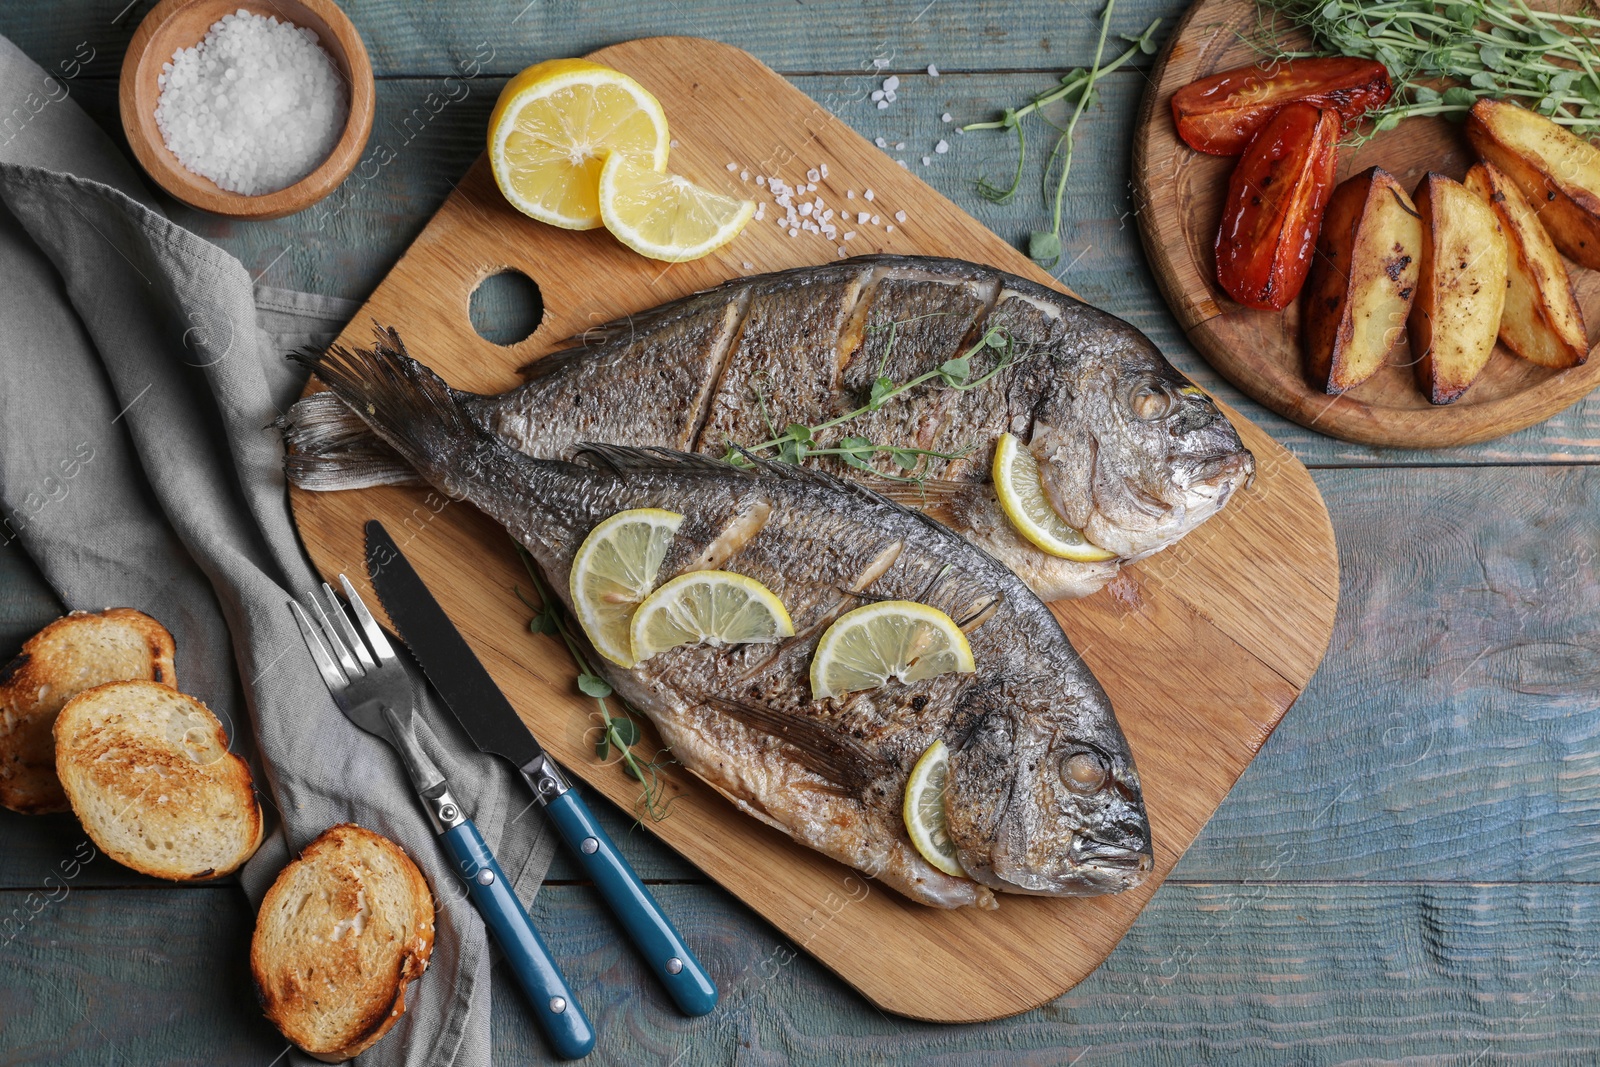 Photo of Delicious baked fish served on wooden rustic table, flat lay. Seafood